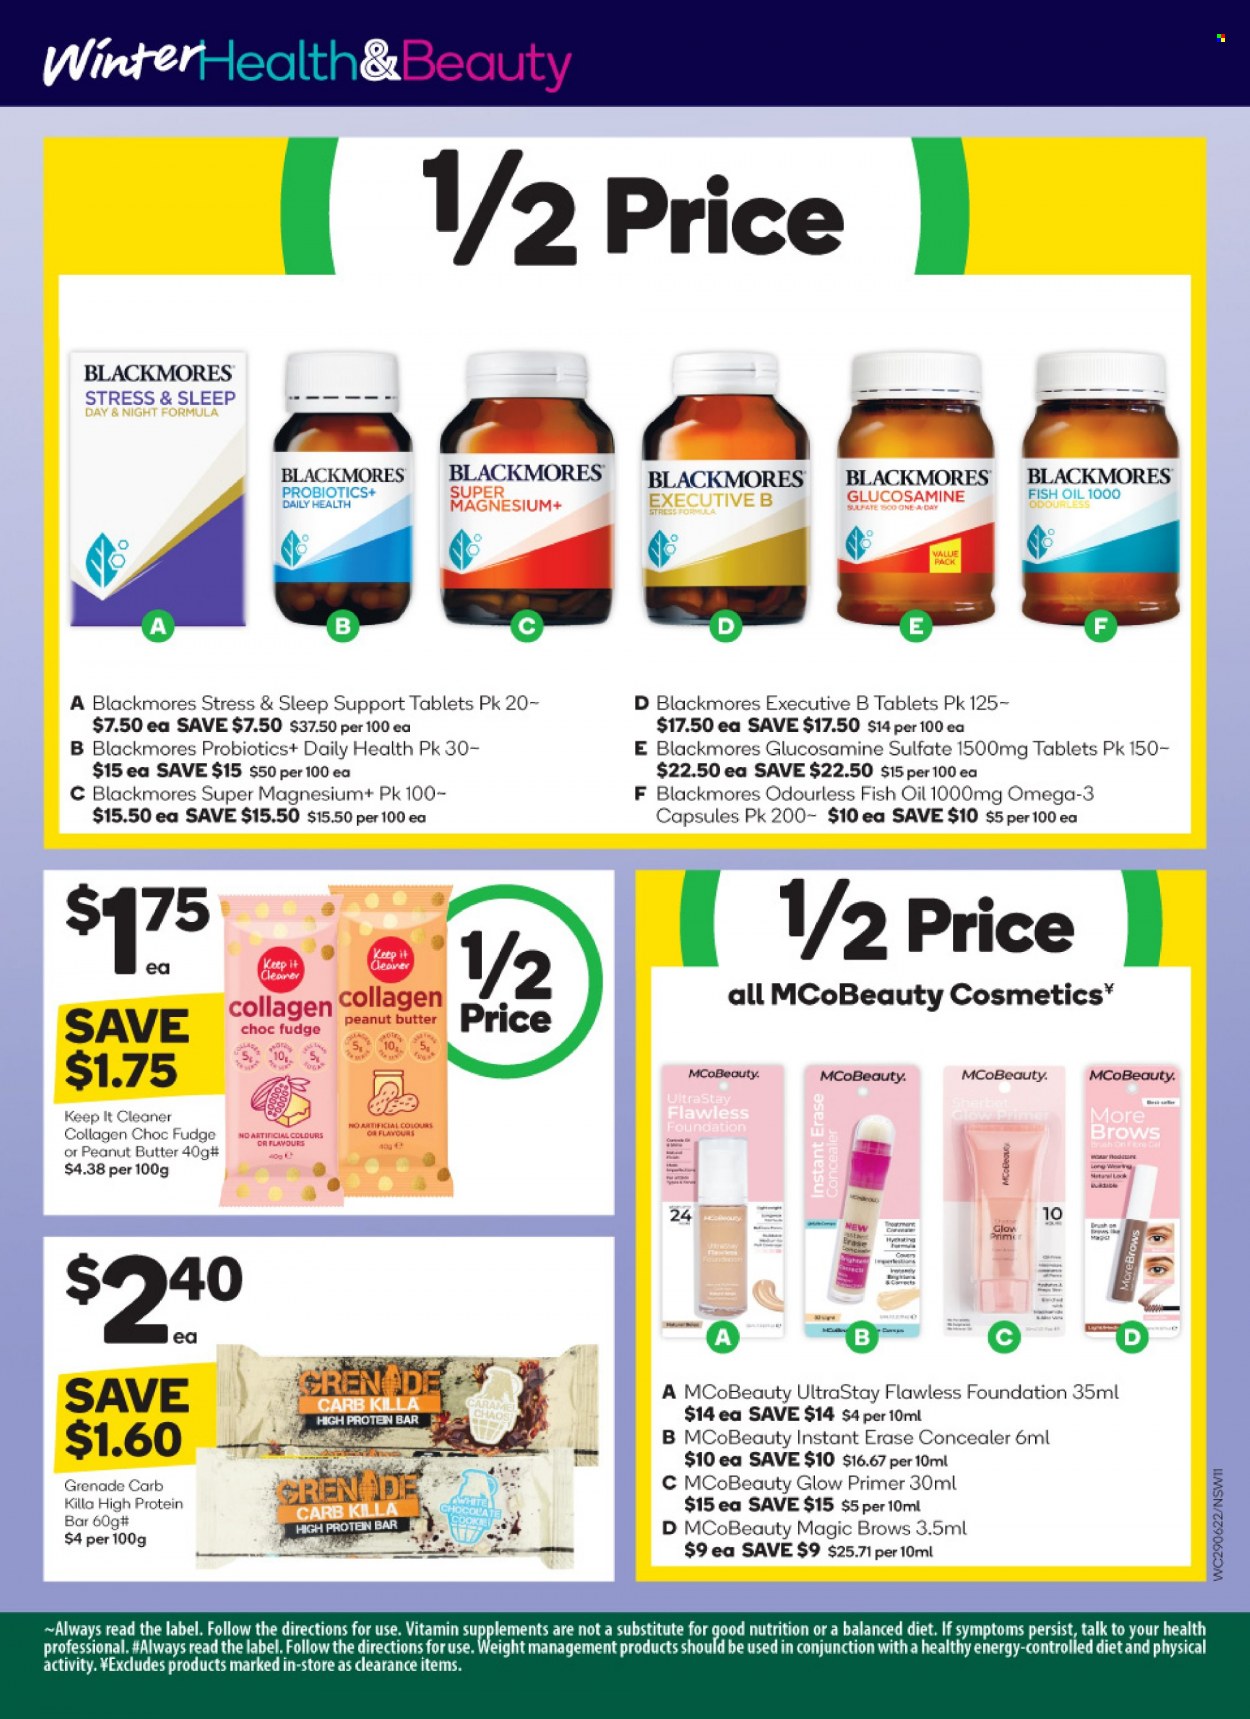 thumbnail - Woolworths Catalogue - 29 Jun 2022 - 5 Jul 2022 - Sales products - fudge, protein bar, caramel, oil, cleaner, corrector, brush, fish oil, glucosamine, magnesium, probiotics, Omega-3, Blackmores. Page 11.